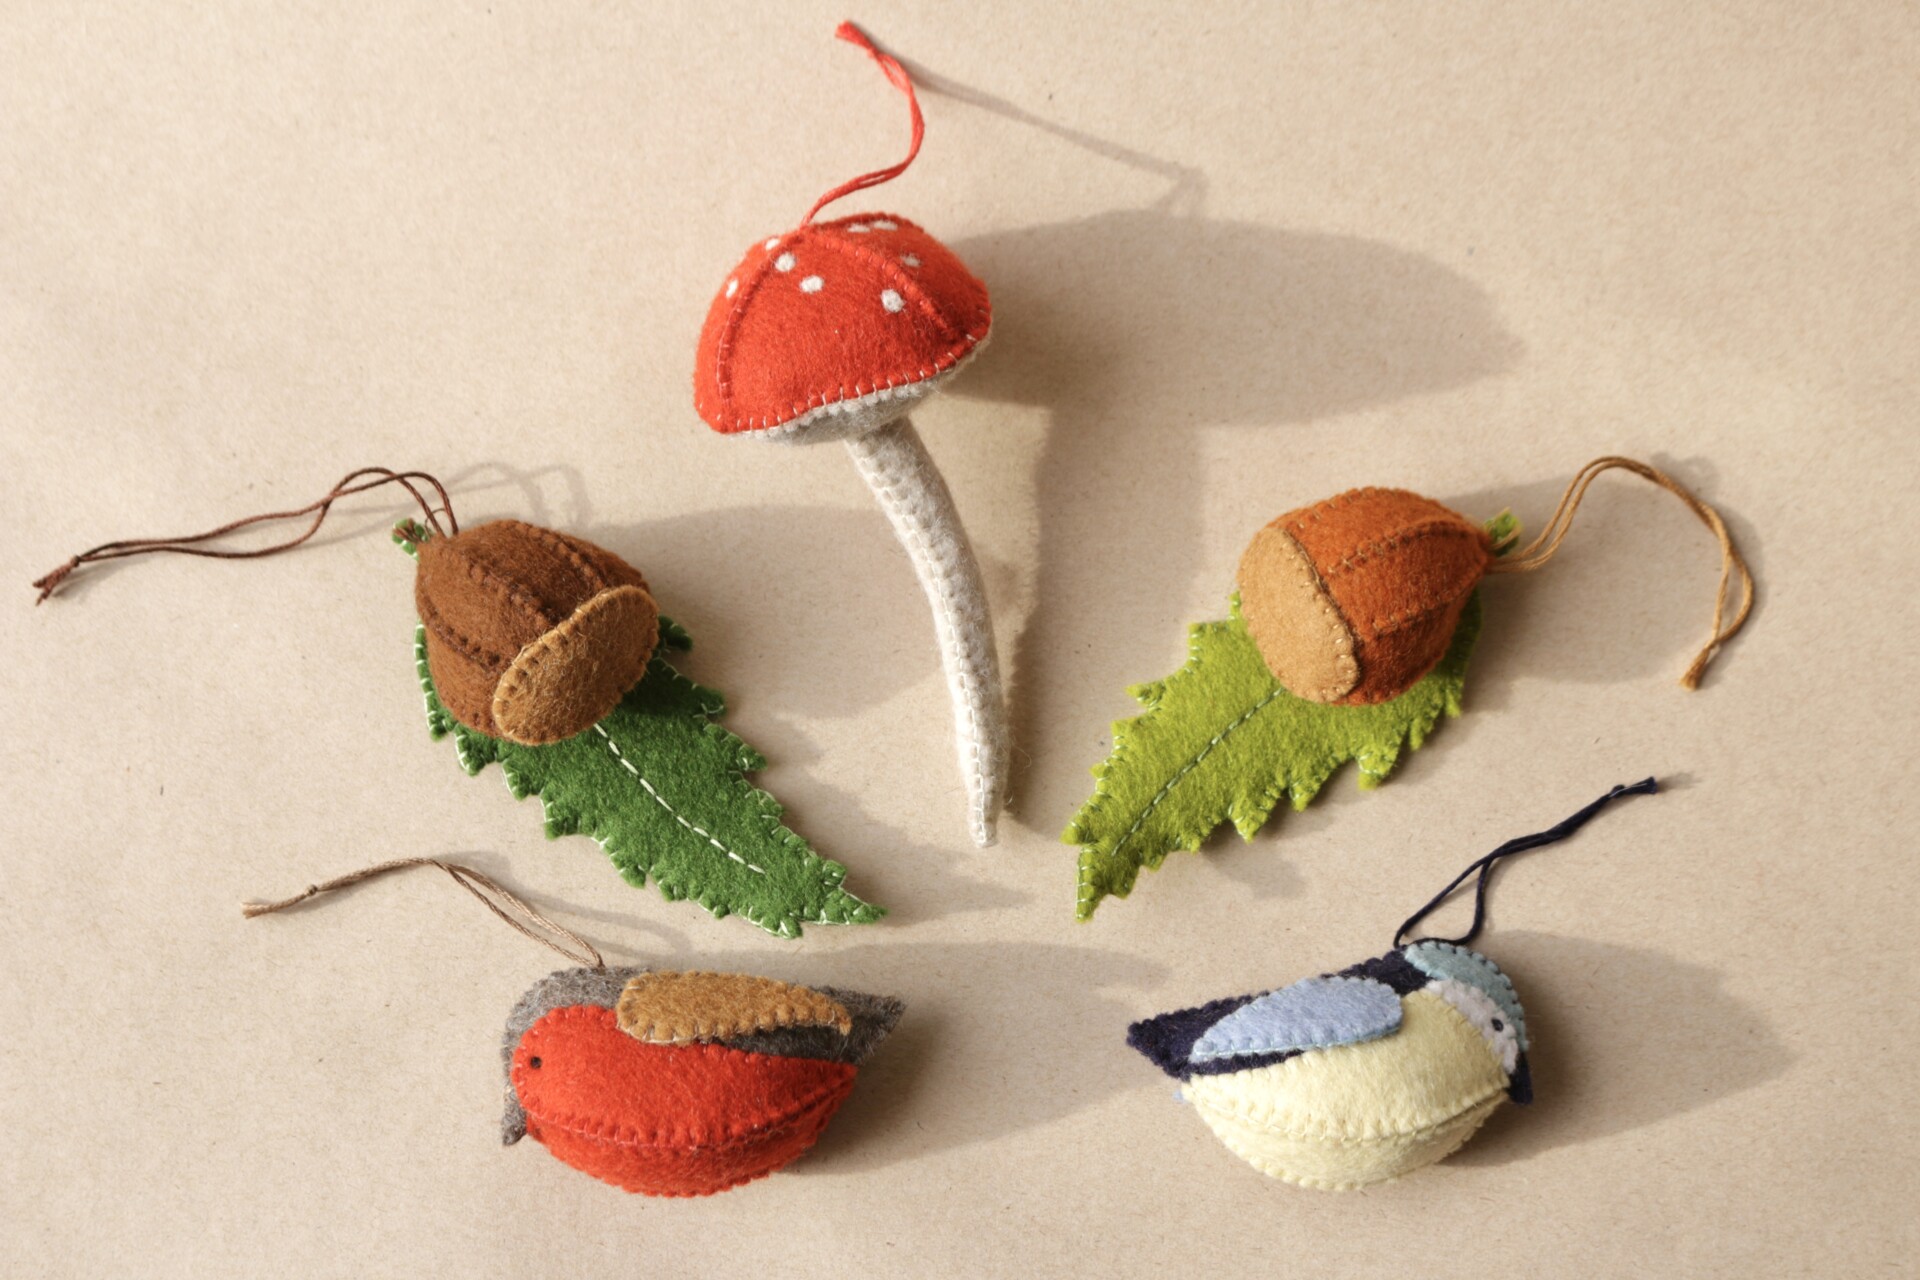 Felt decorations and natural toys made from wool felt, a natural and durable material.